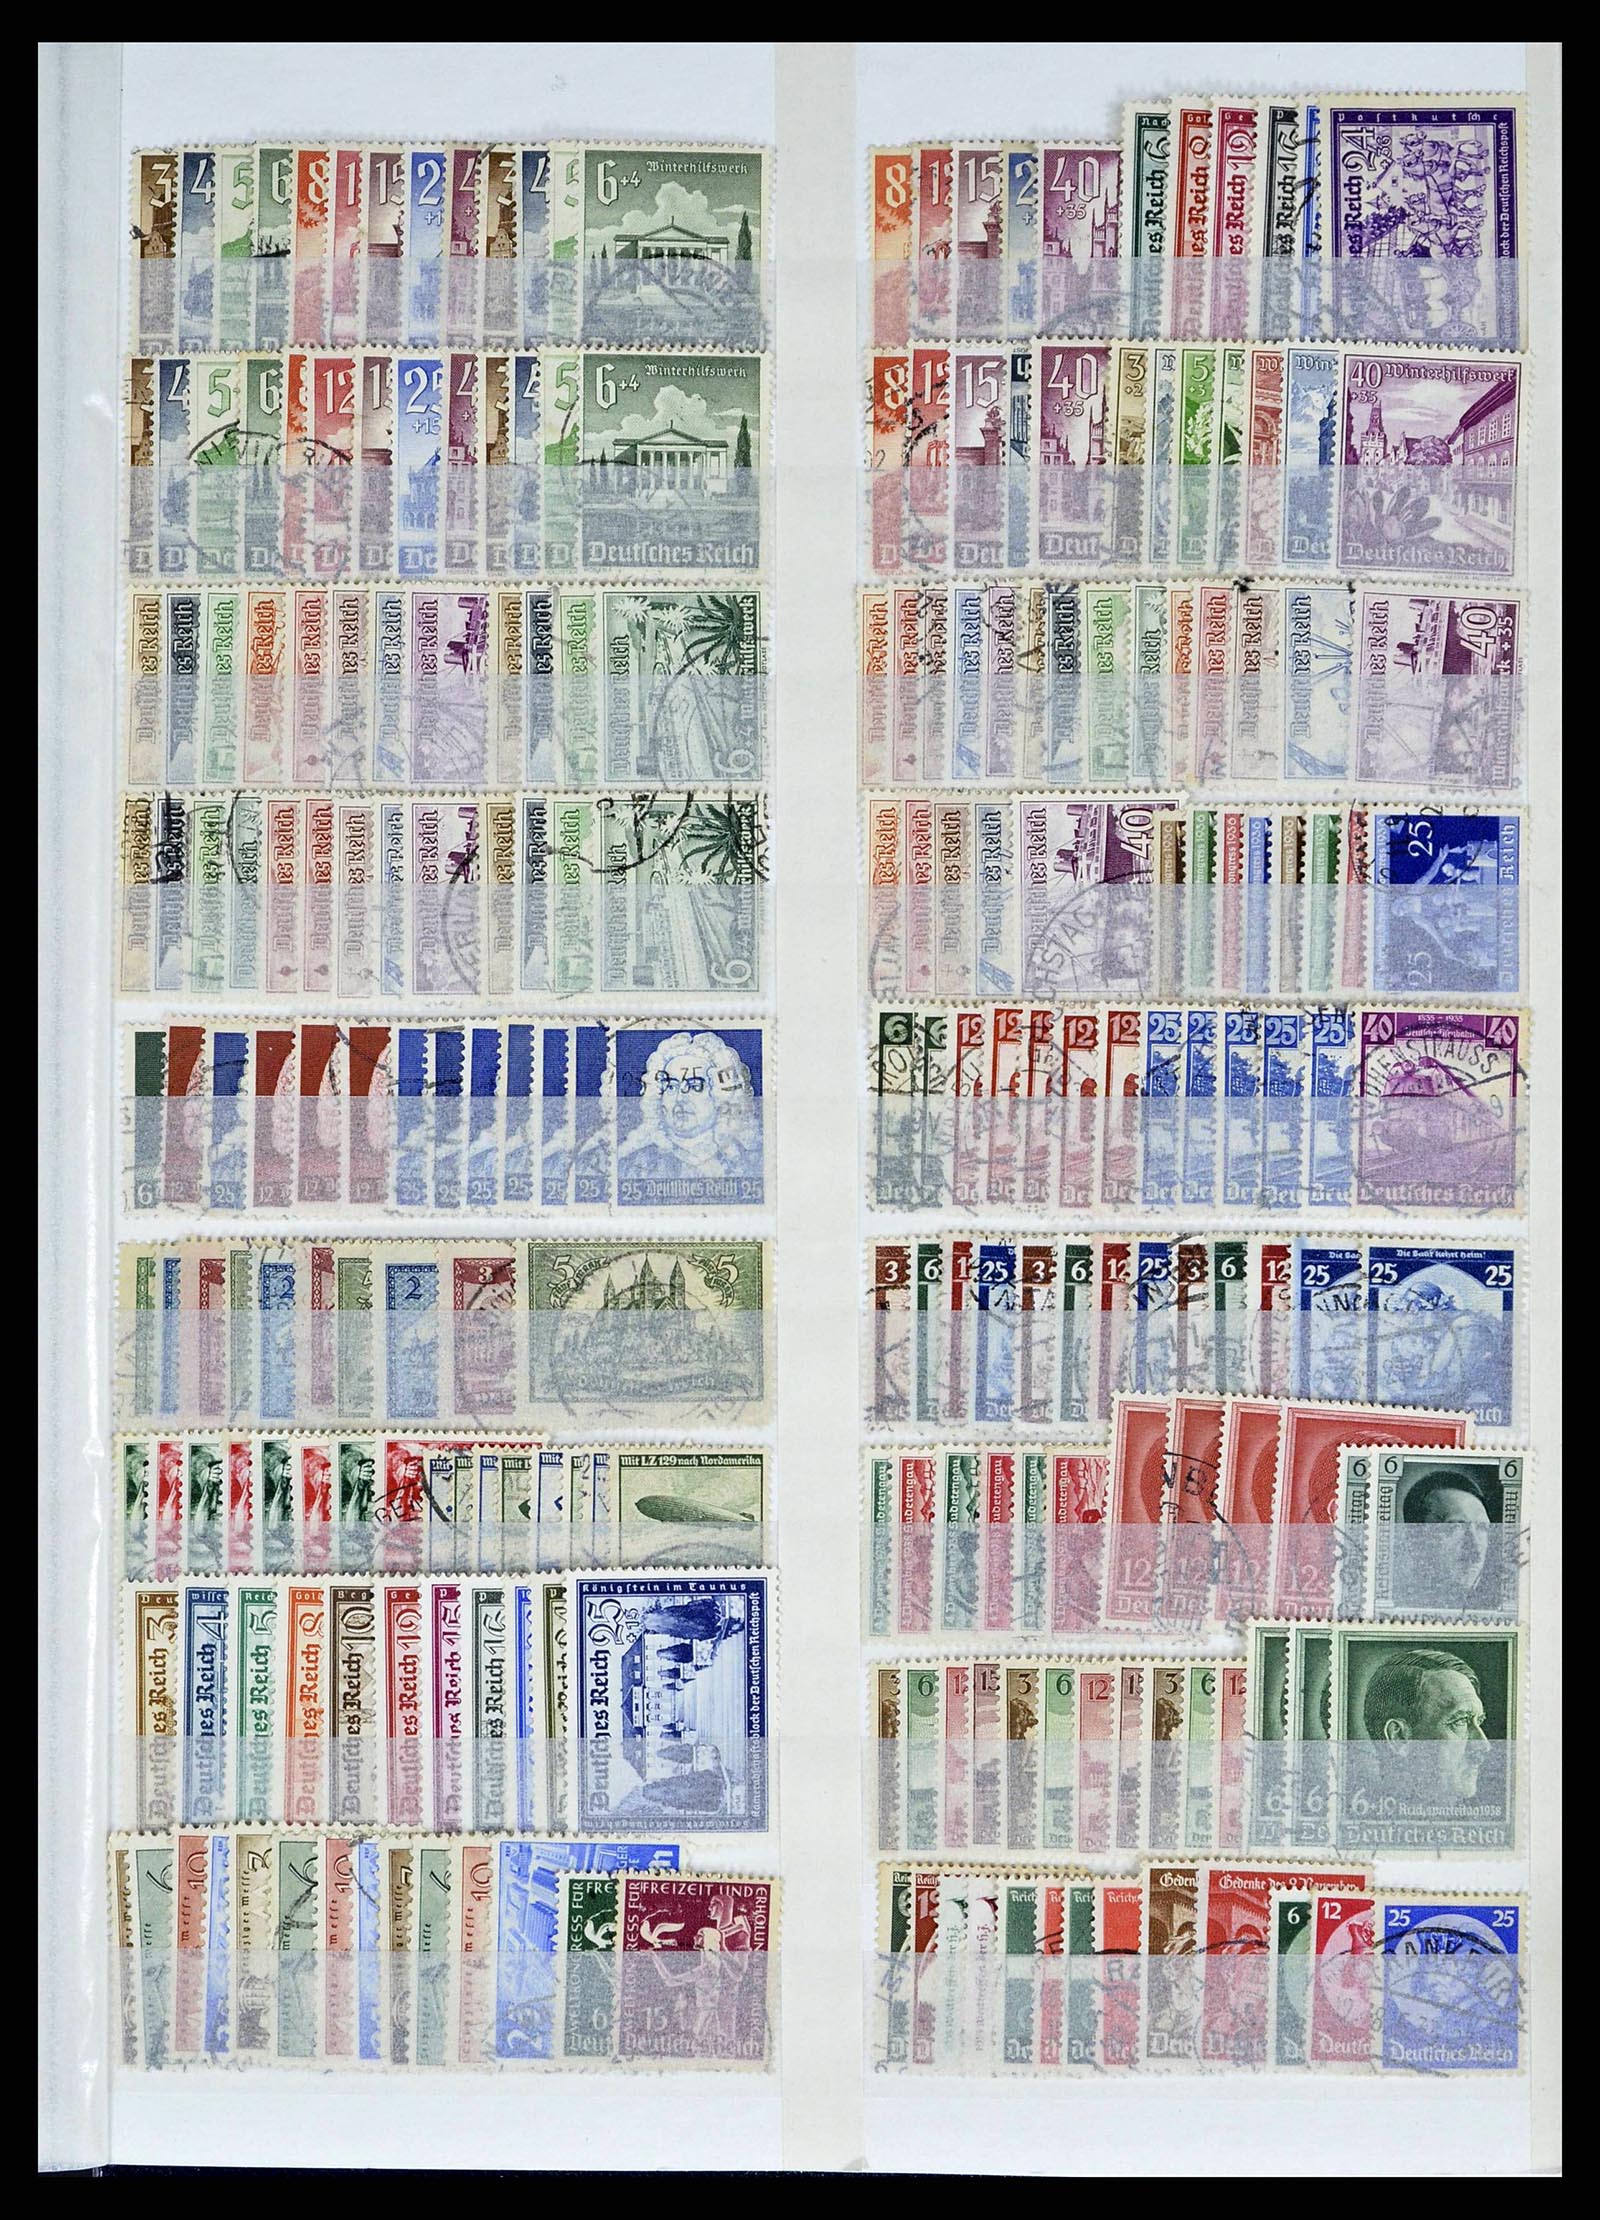 38720 0061 - Stamp collection 38720 European countries.